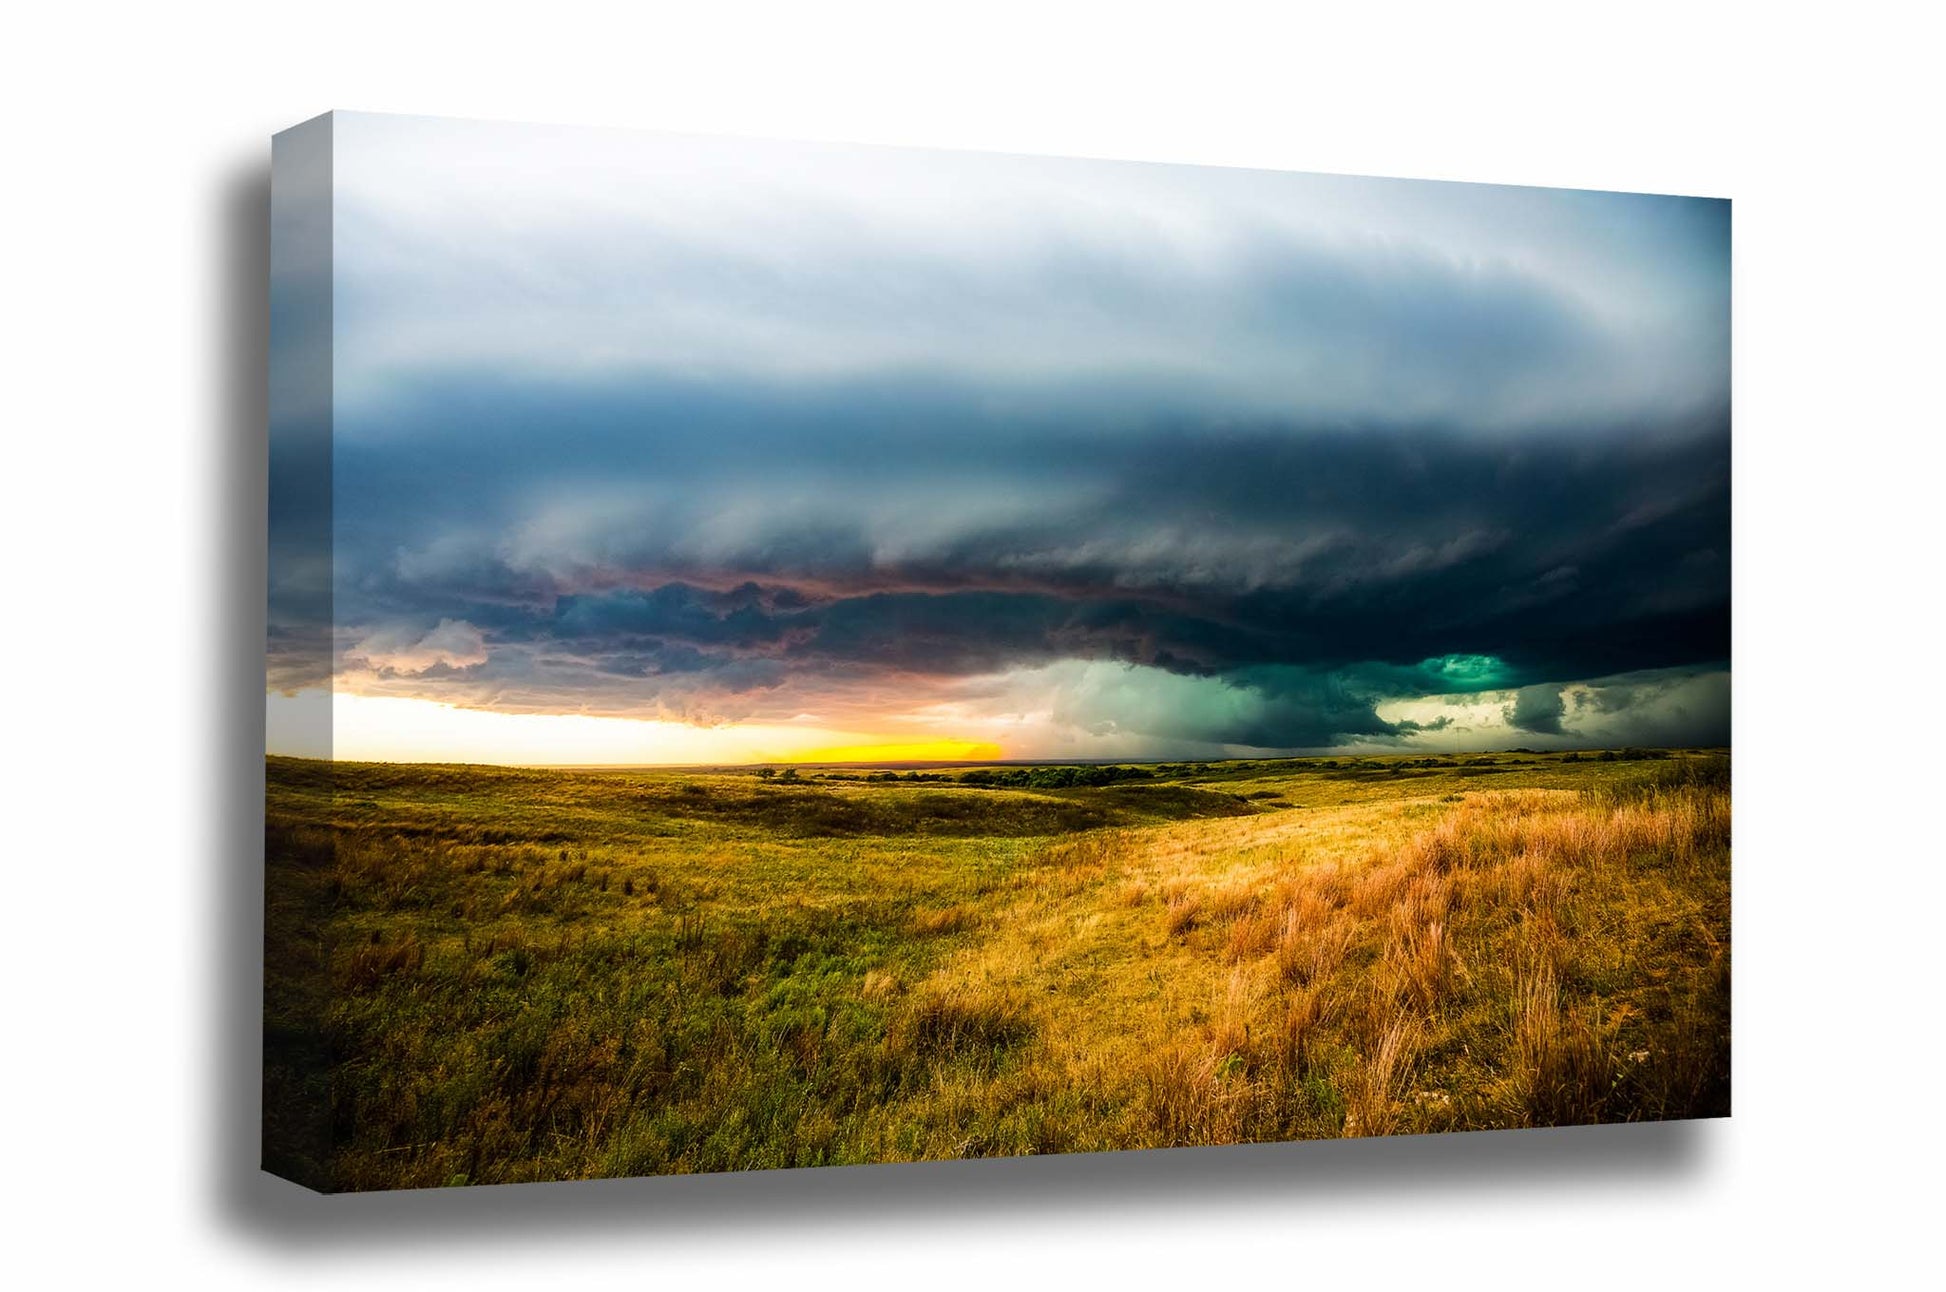 Storm canvas wall art of a supercell thunderstorm over open prairie at sunset near Medicine Lodge, Kansas by Sean Ramsey of Southern Plains Photography.